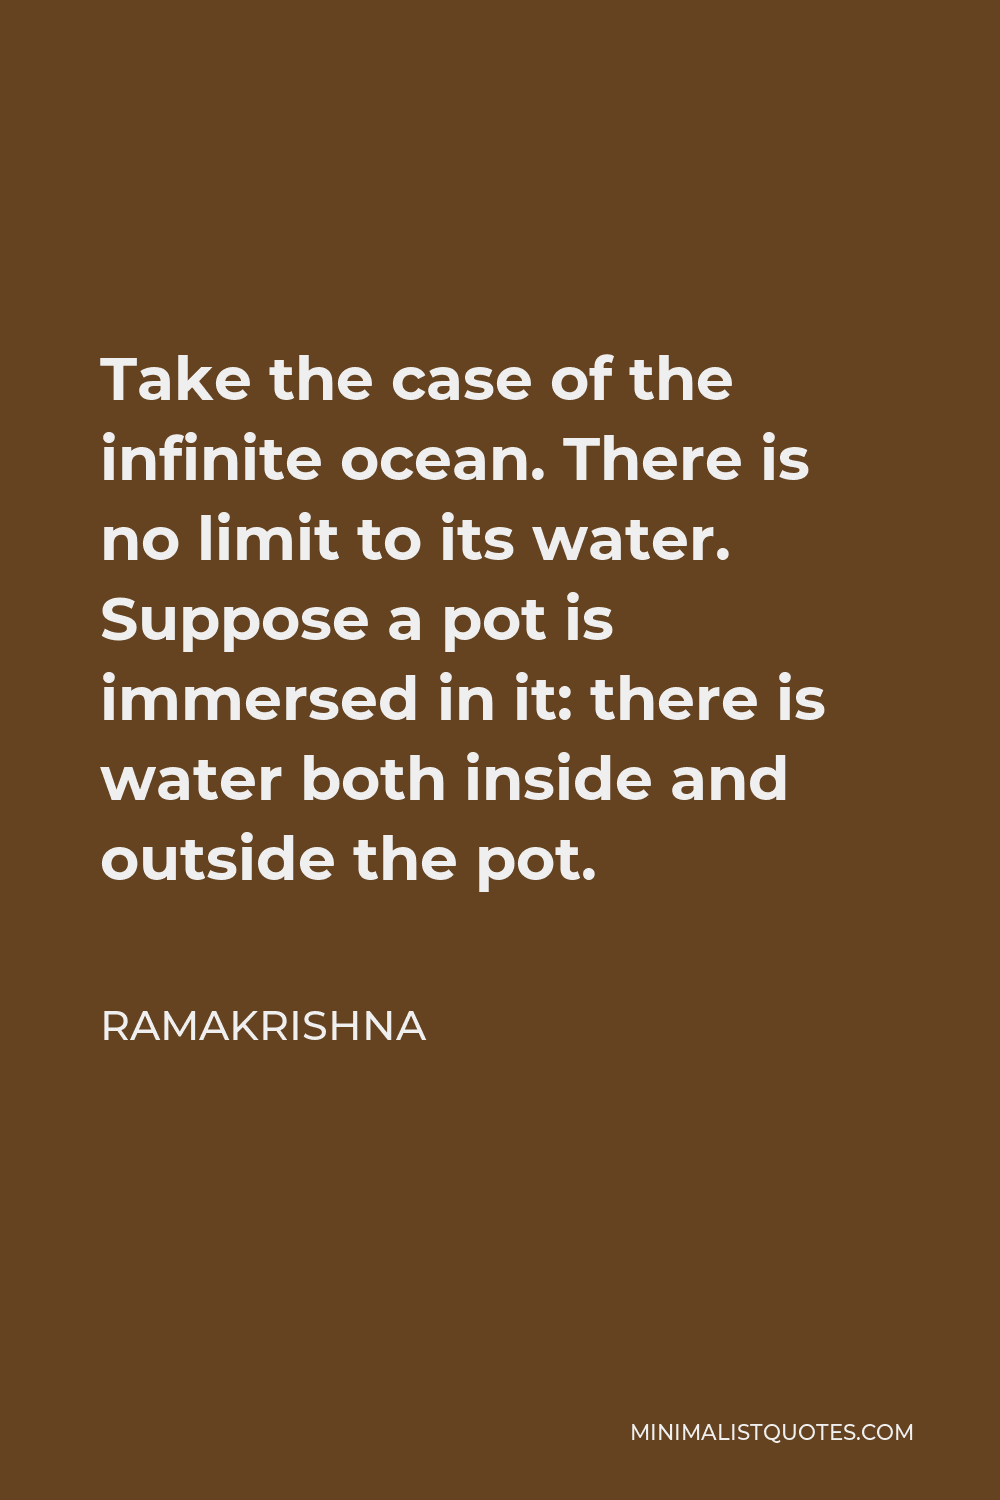 Ramakrishna Quote - Take the case of the infinite ocean. There is no limit to its water. Suppose a pot is immersed in it: there is water both inside and outside the pot.